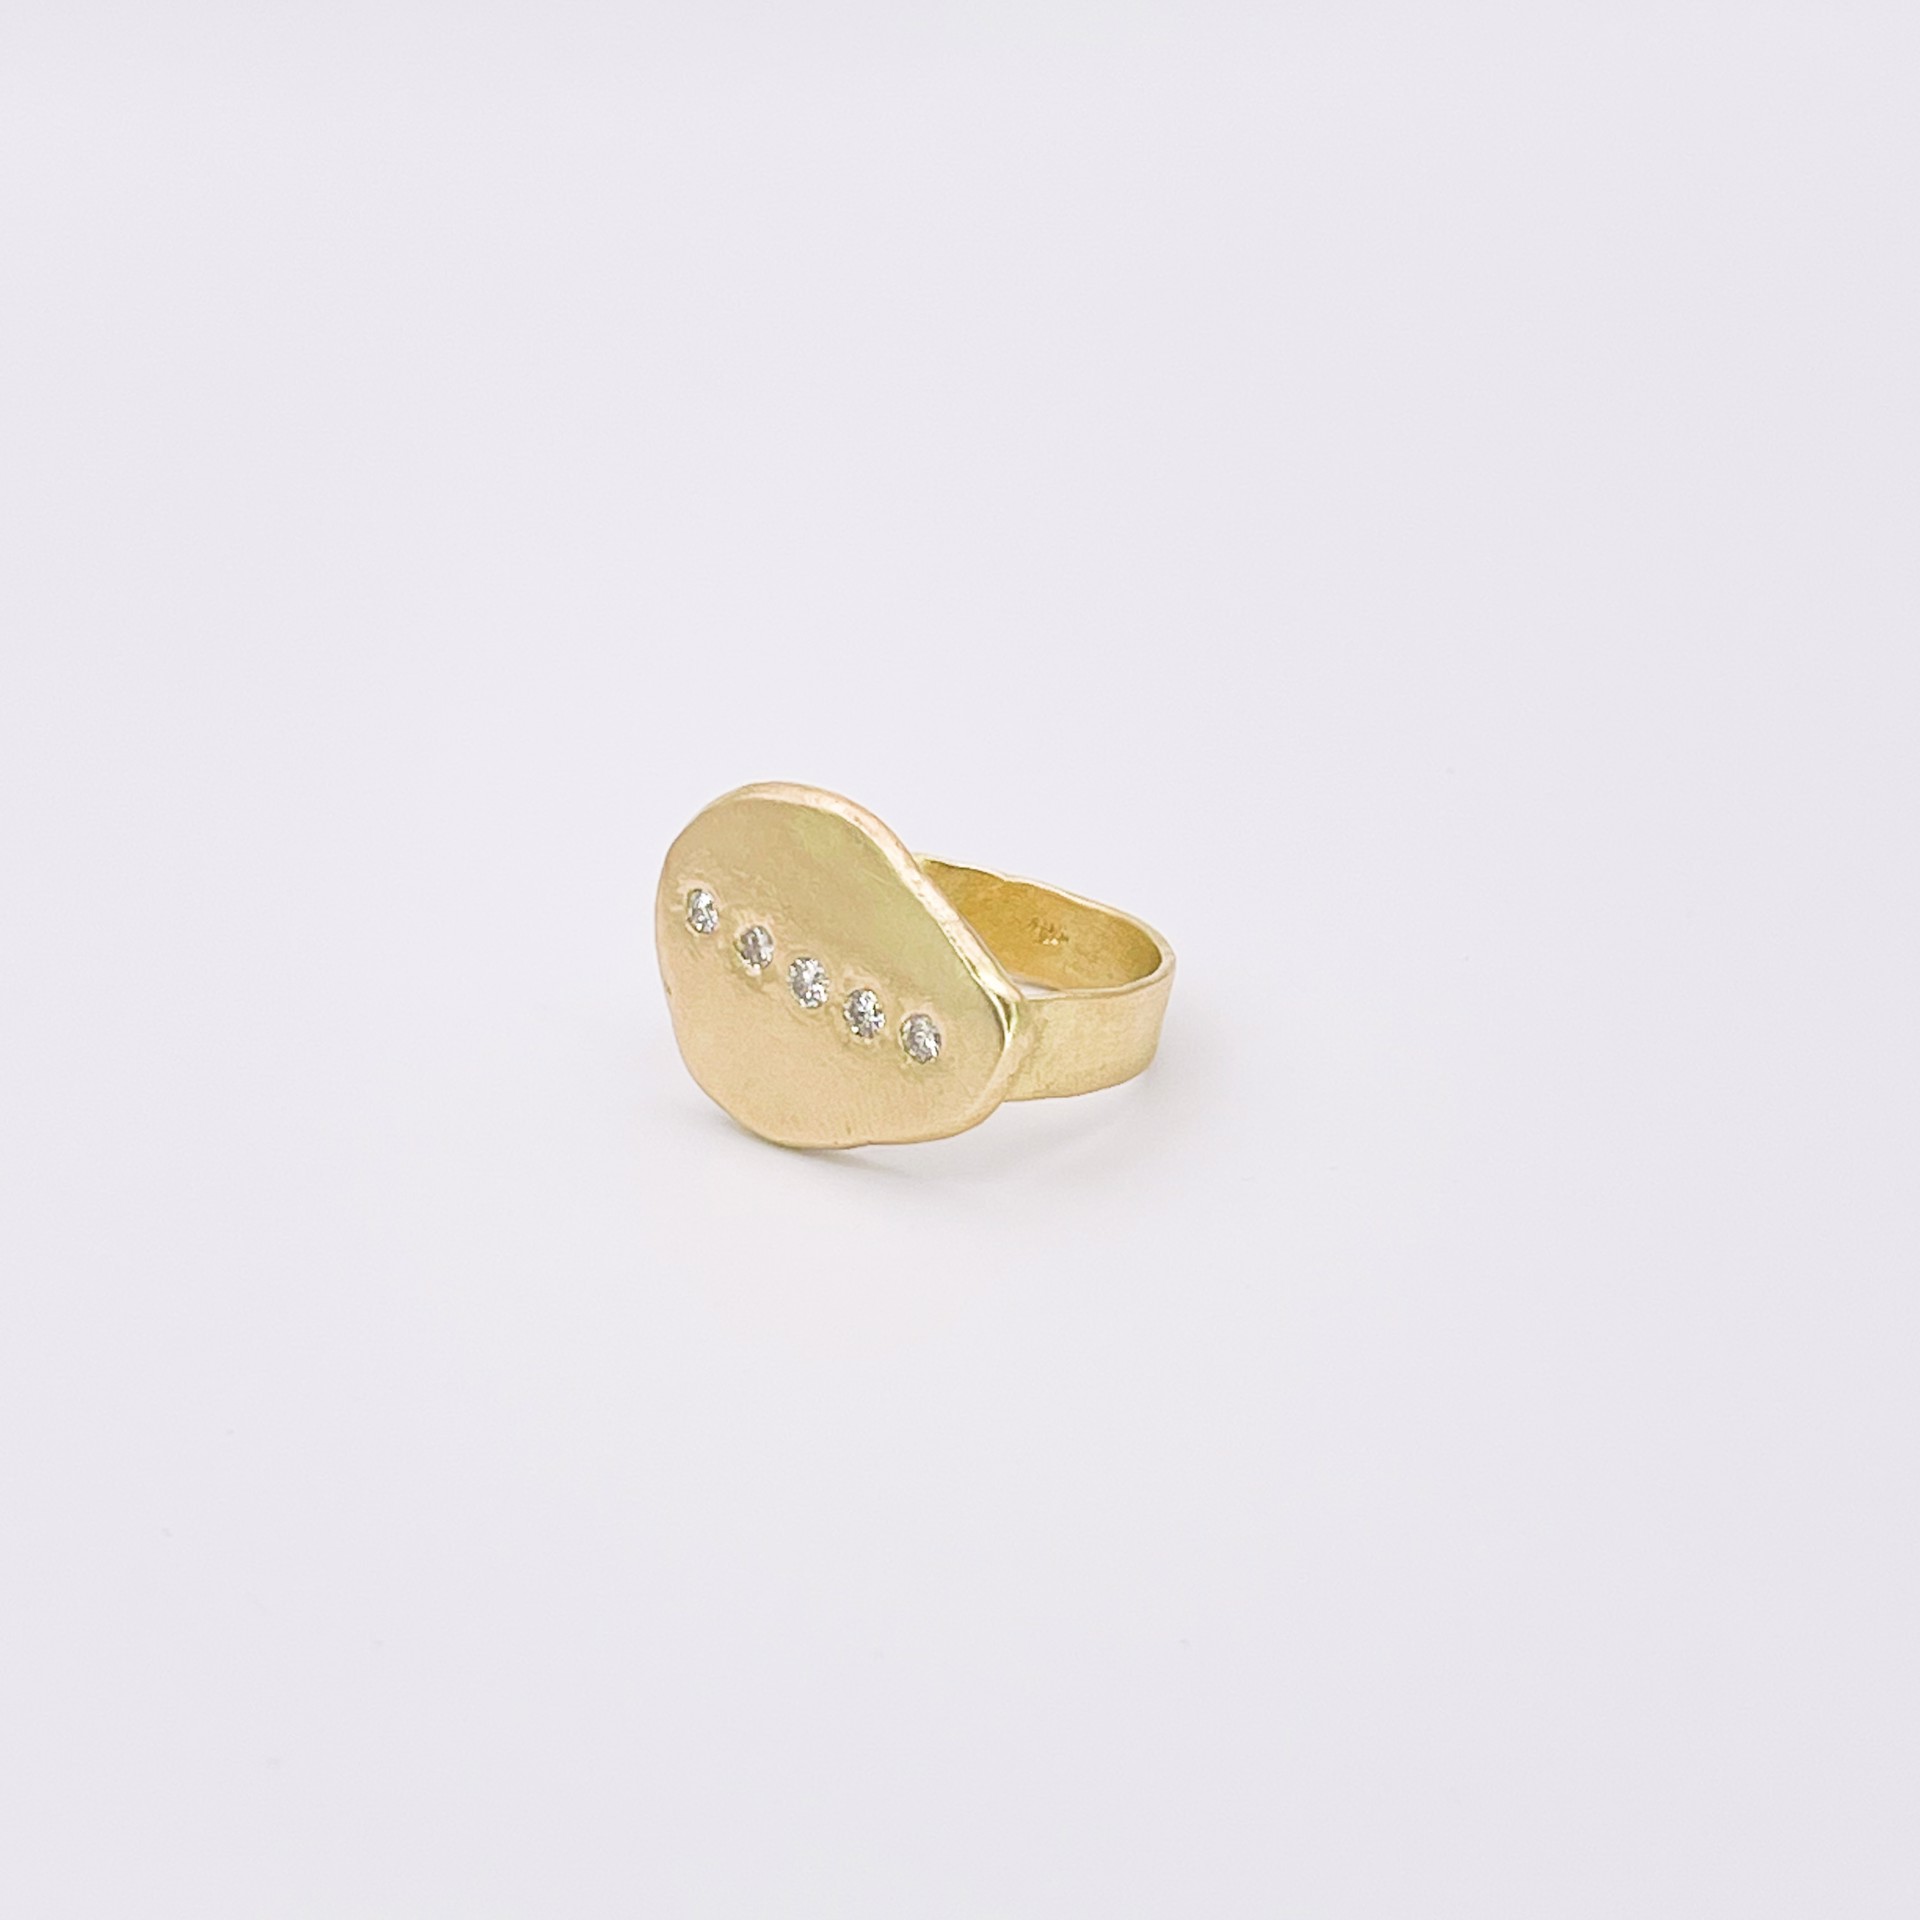 LHR04- Flat oval ring with 5 diamonds by Leandra Hill